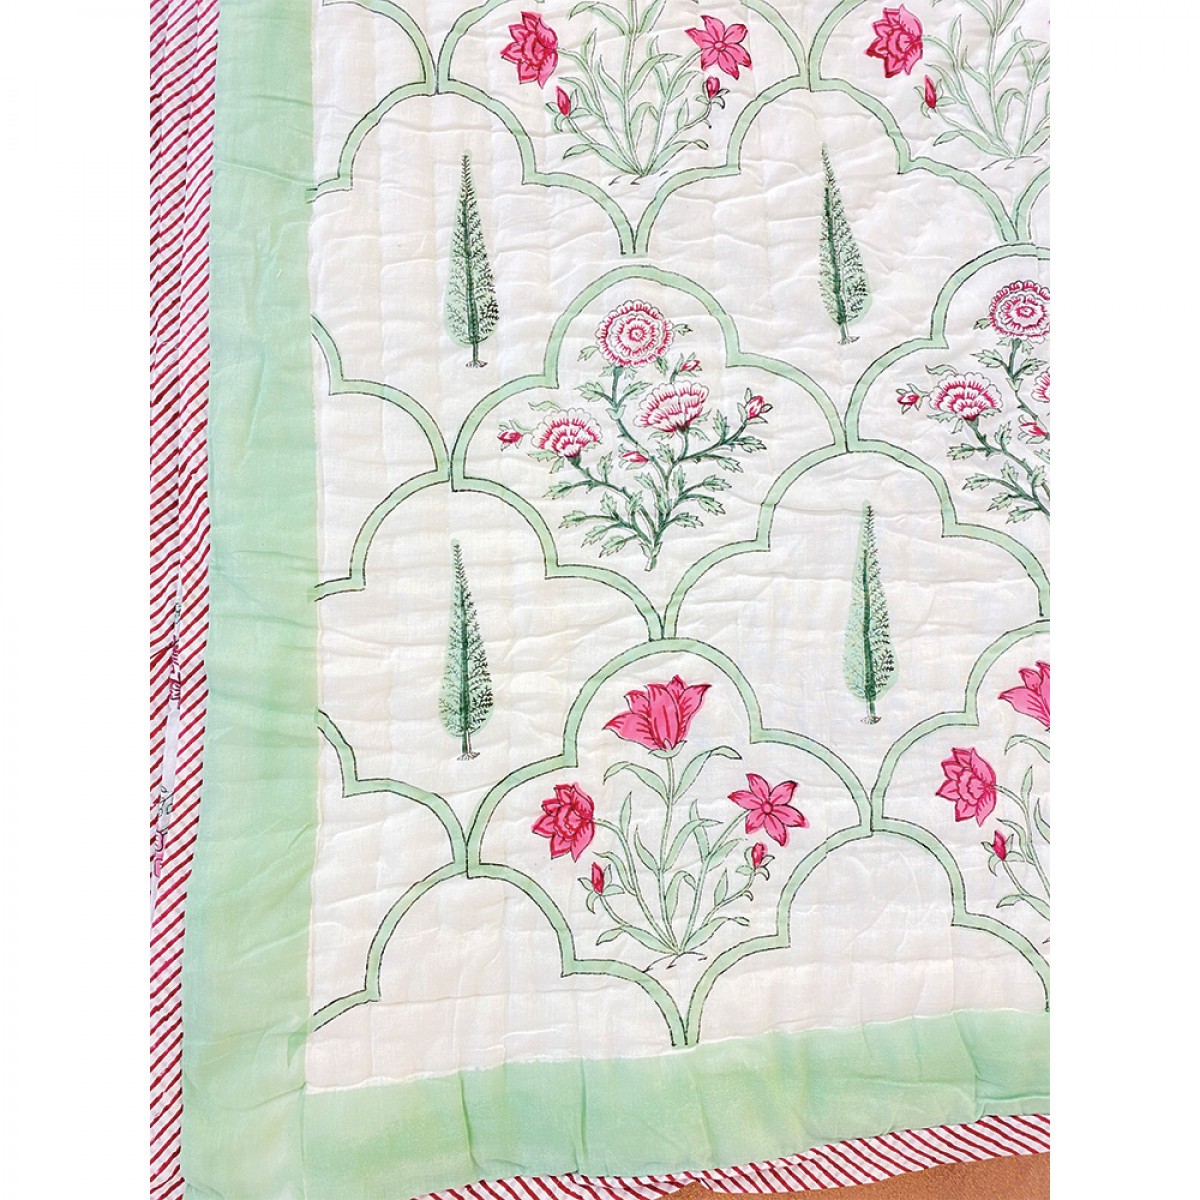 100% Cotton Block Printed Queen Size Quilts - Spring Blossom